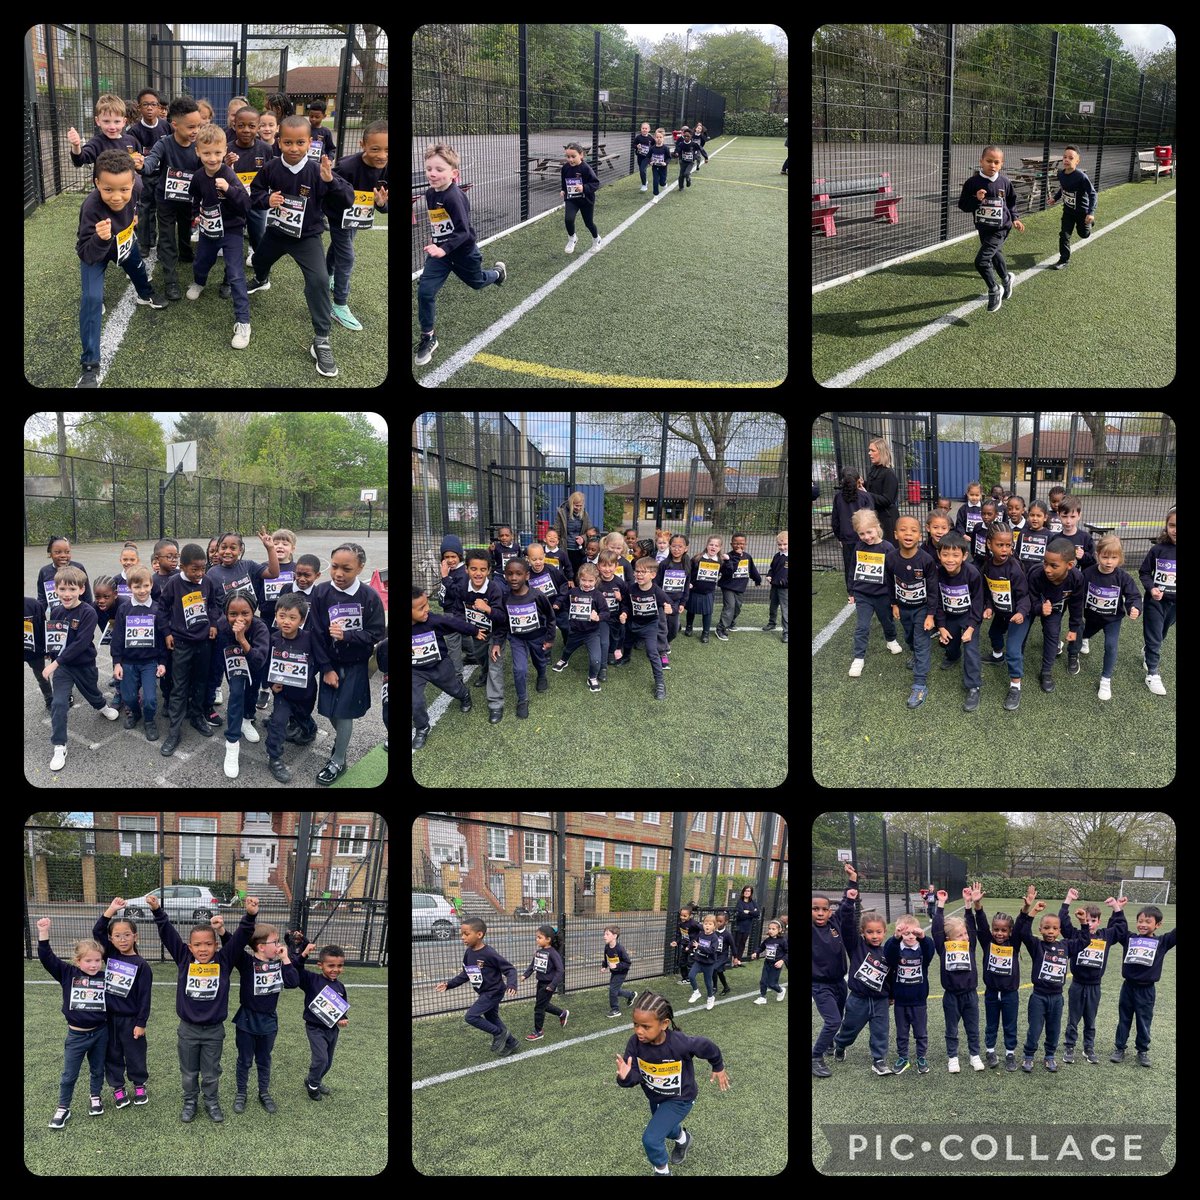 Well done to our KS1 children for completing their TCS Mini London Marathon 24 in Schools event. 98 children completed the 2.6mile distance with KS2 up next. #MiniLondonMarathon #Runwandsworth24 @londonmarathon @wandschoolgames